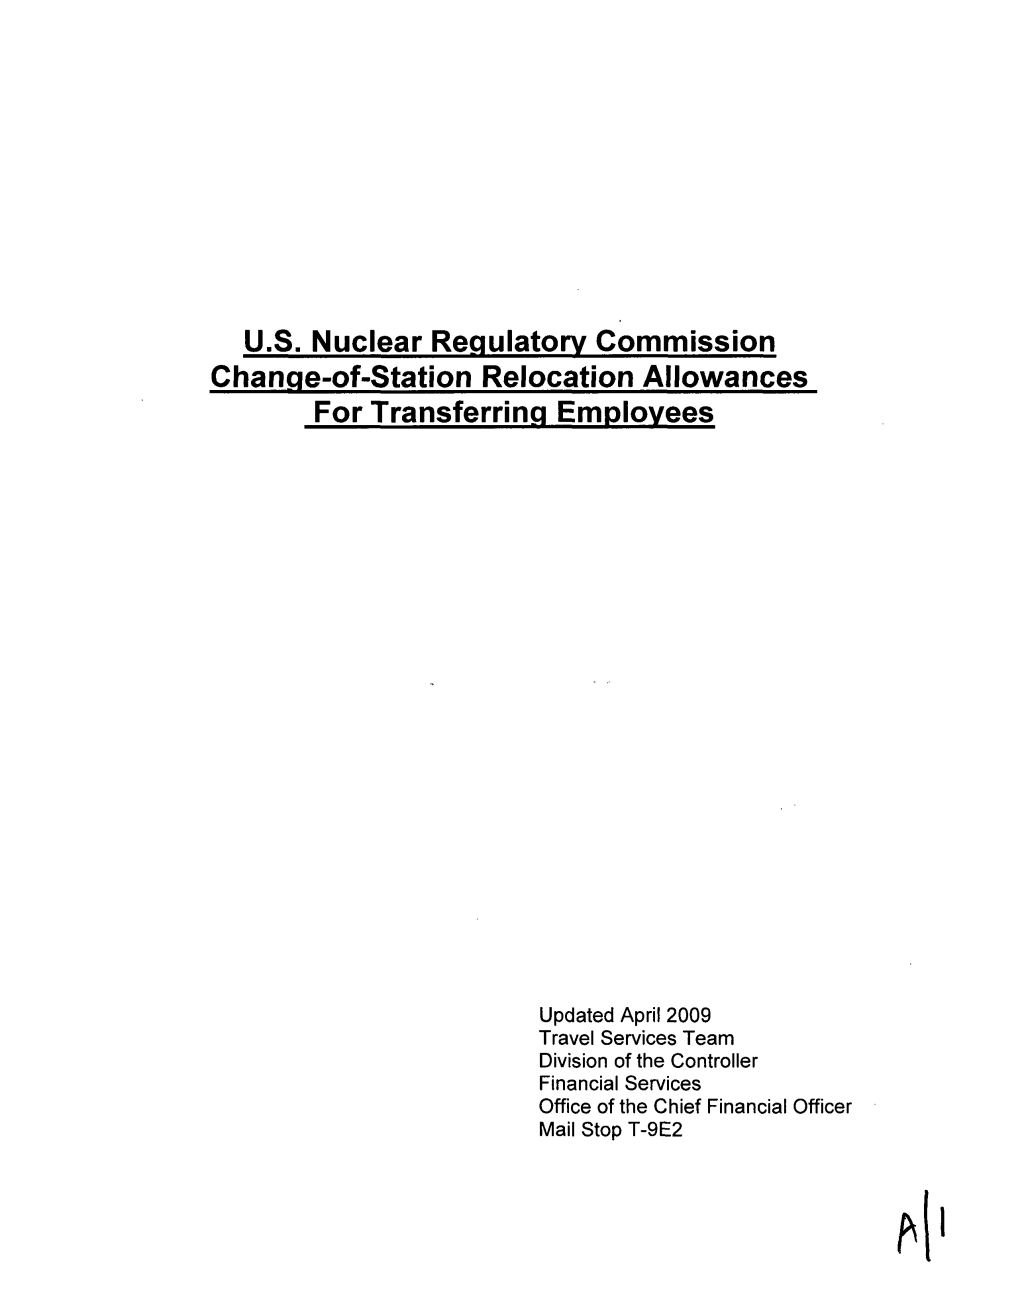 US Nuclear Regulatory Commission Change-Of-Station Relocation Allowances for Transferring Employees